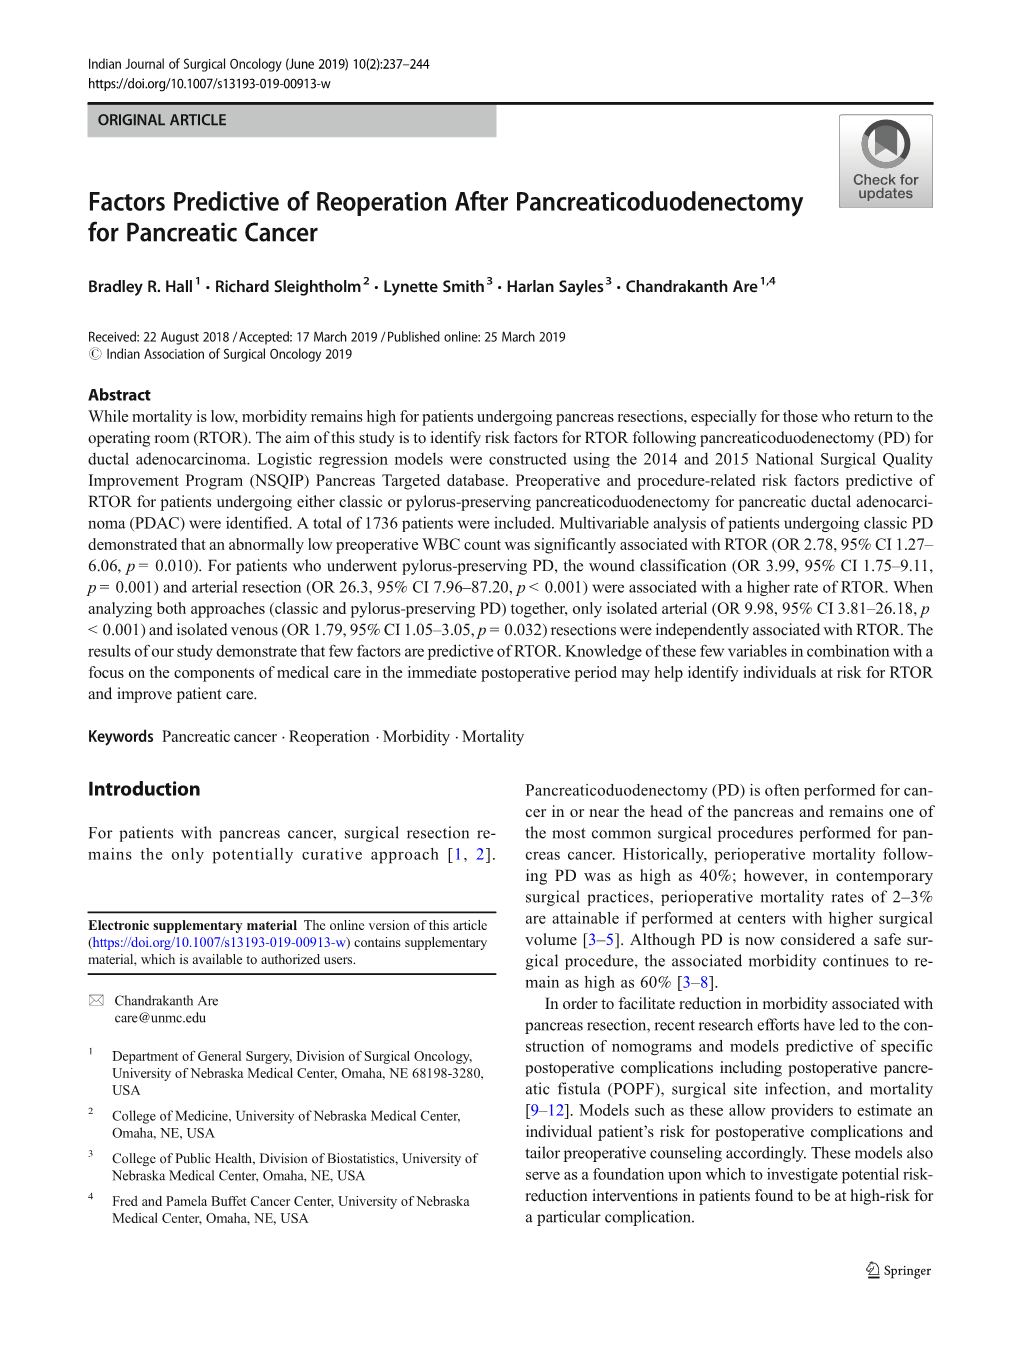 Factors Predictive of Reoperation After Pancreaticoduodenectomy for Pancreatic Cancer